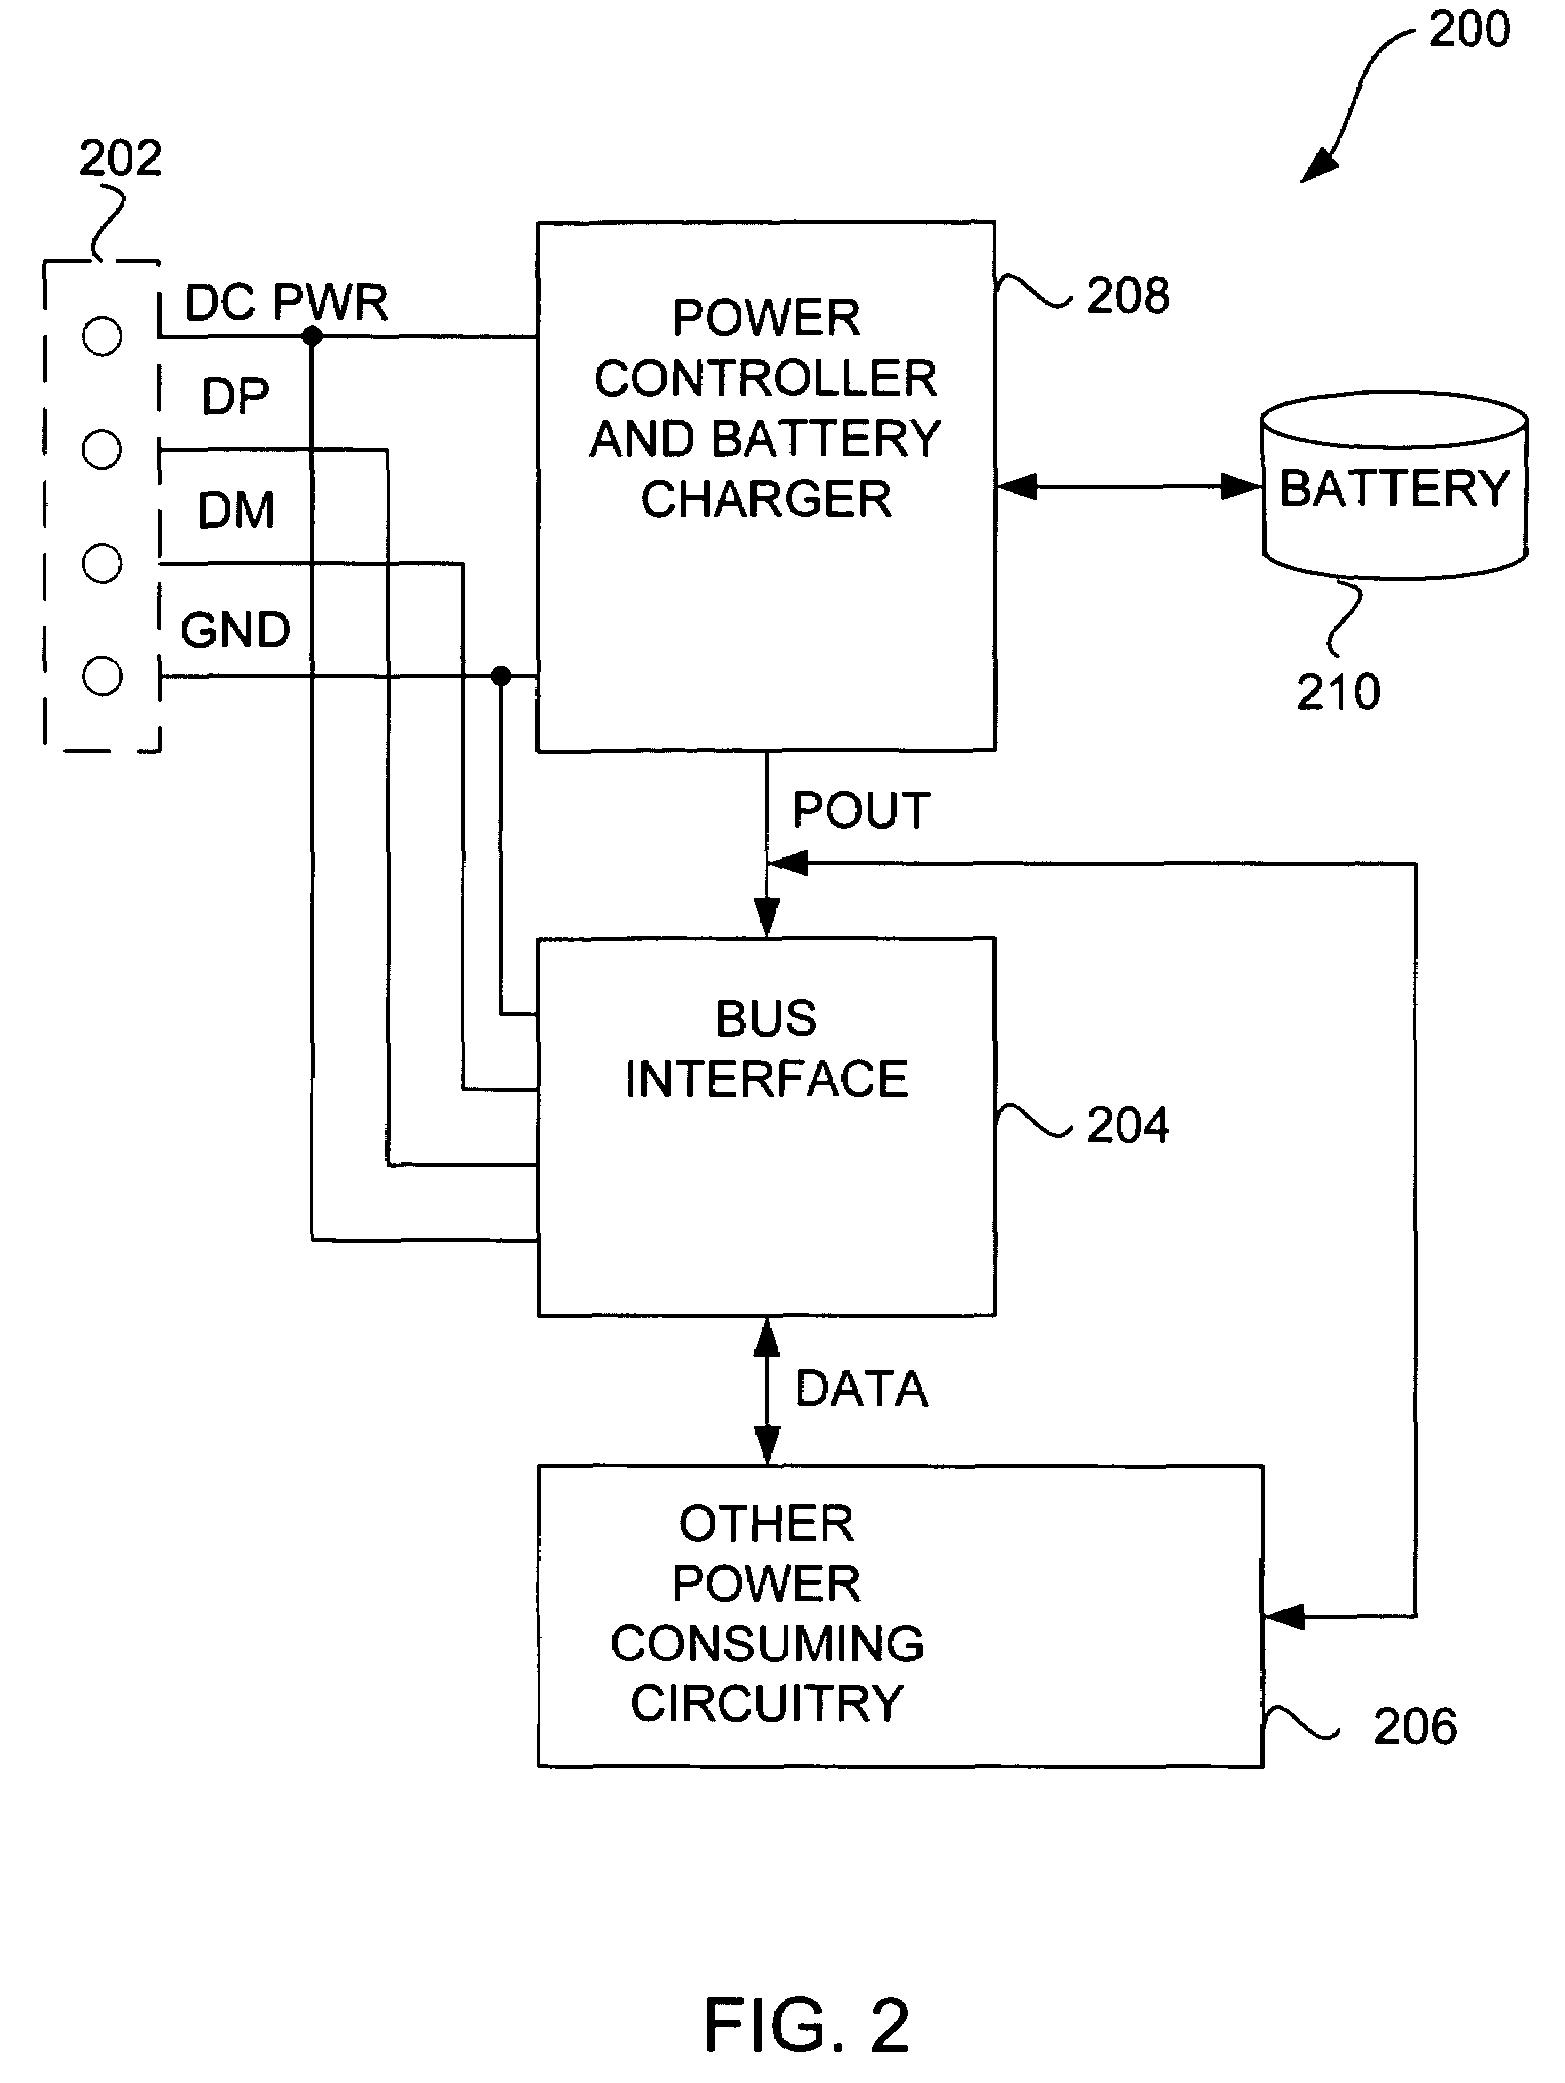 Method and system for operating a portable electronic device in a power-limited manner